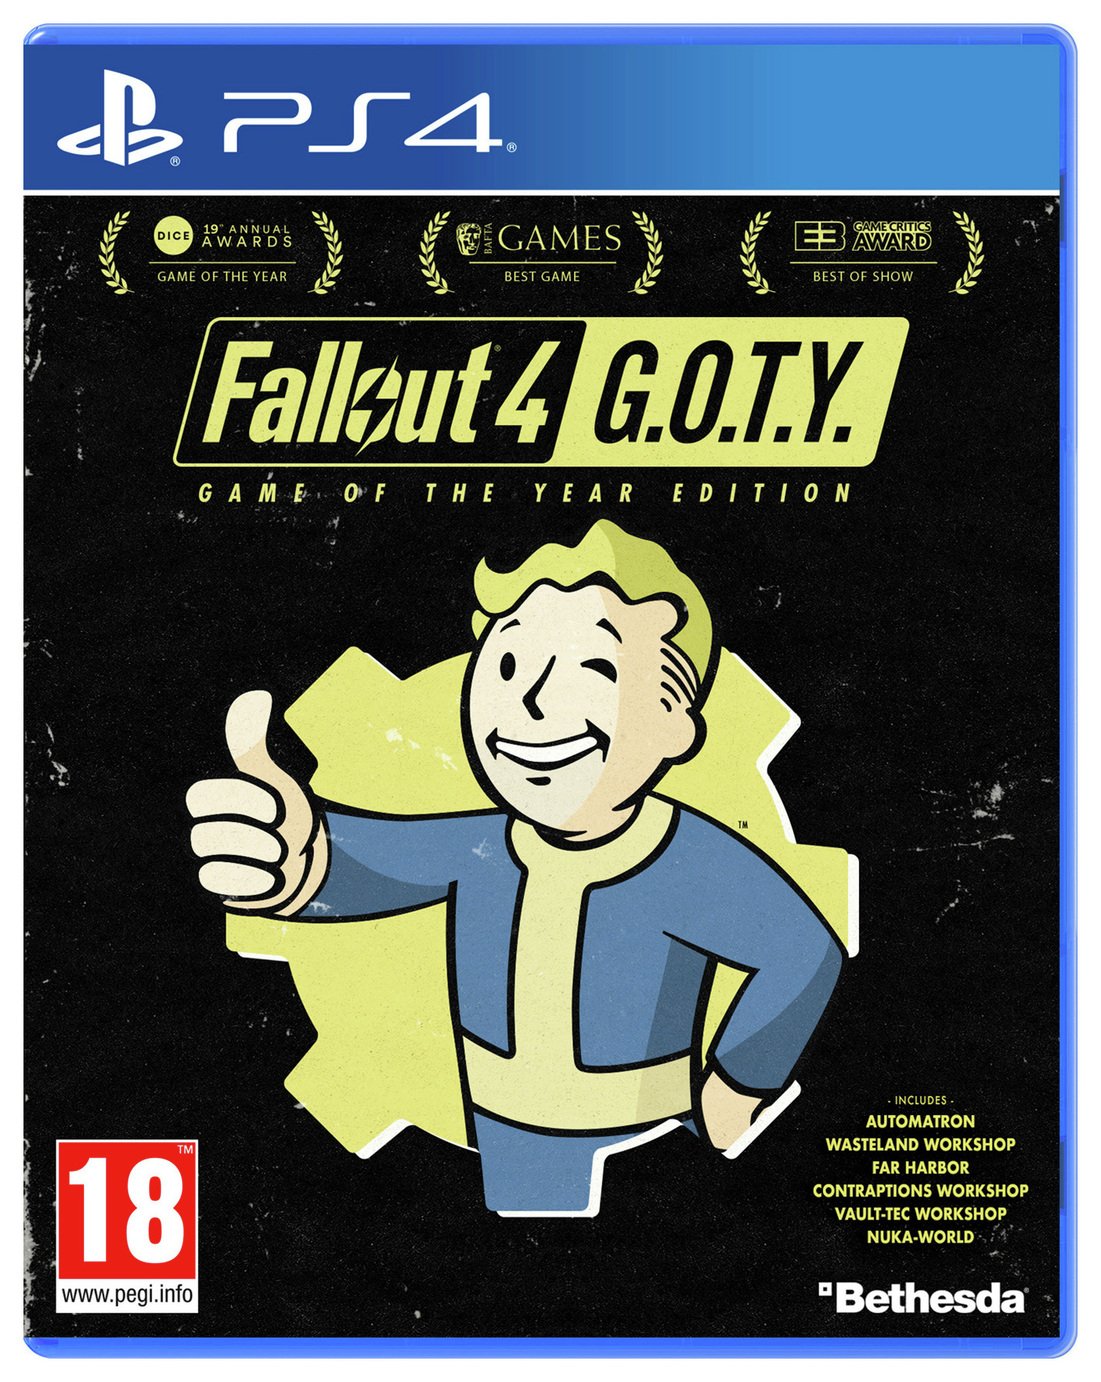 Fallout 4 GOTY Edition PS4 Game review